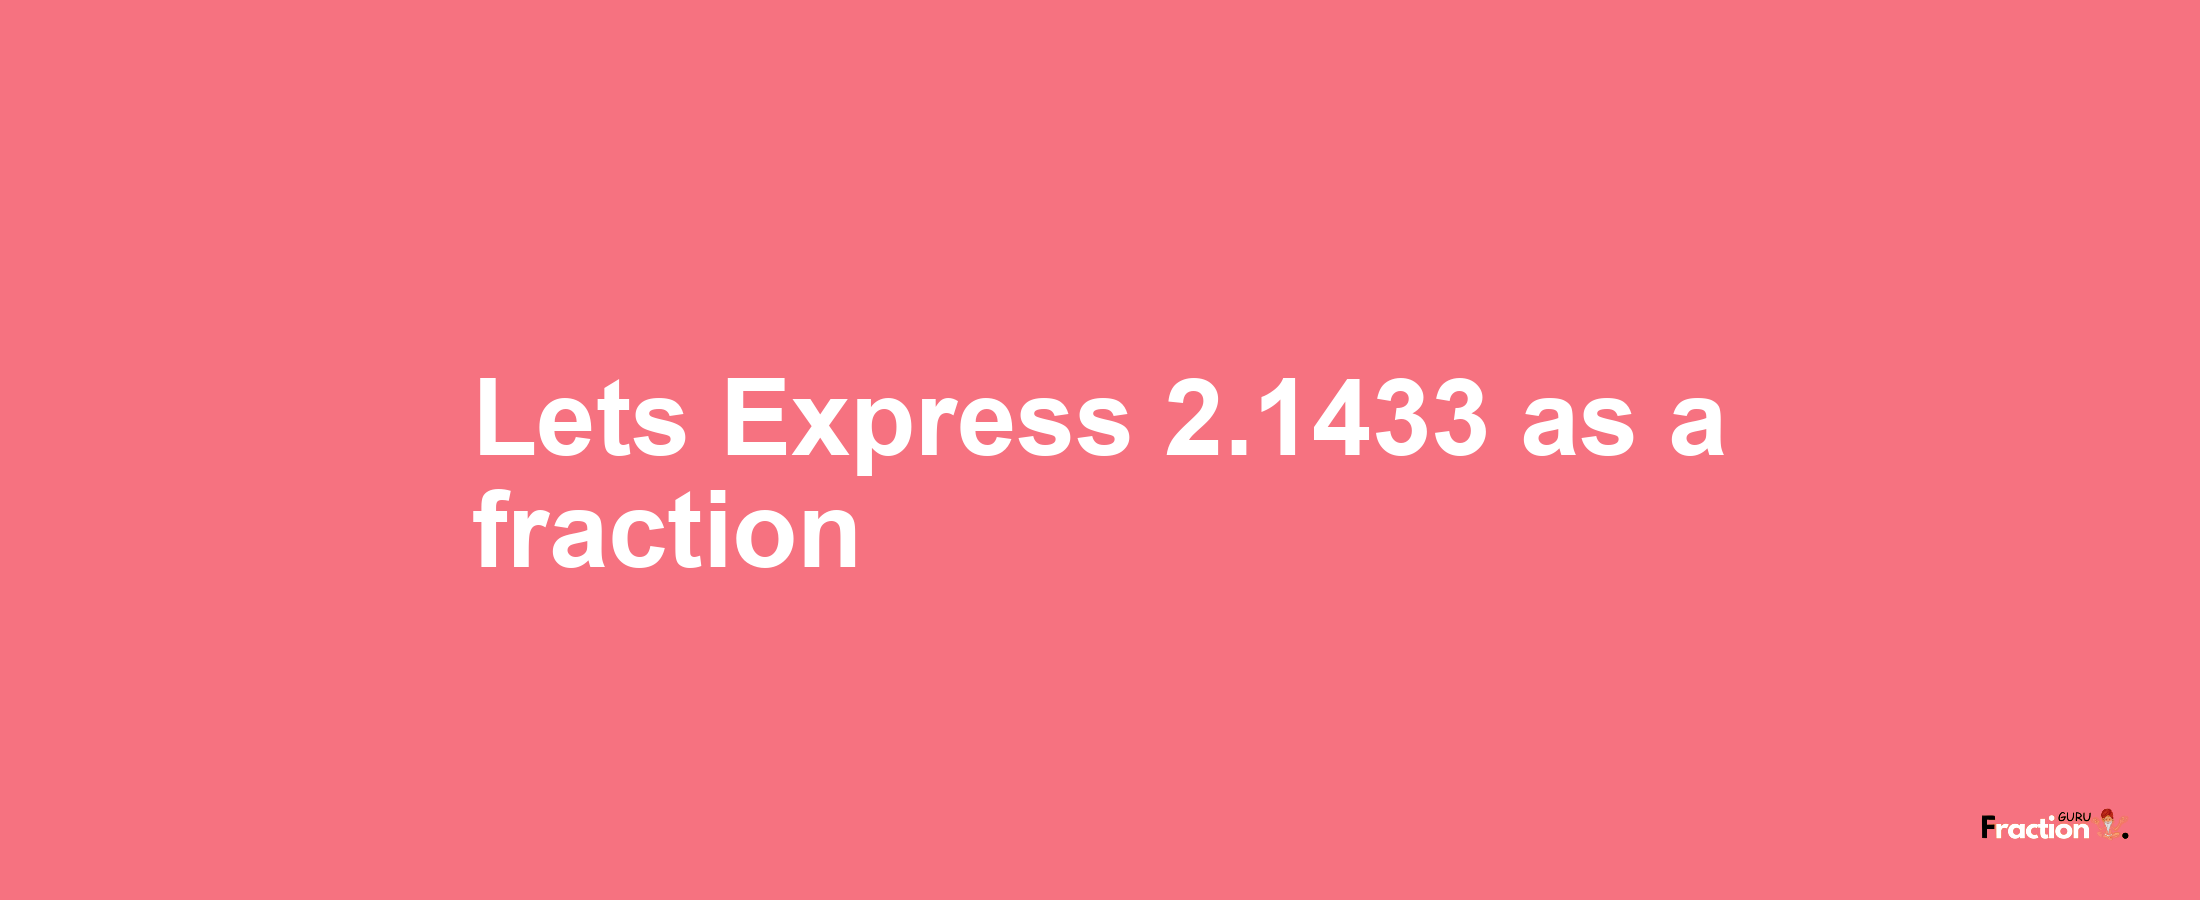 Lets Express 2.1433 as afraction